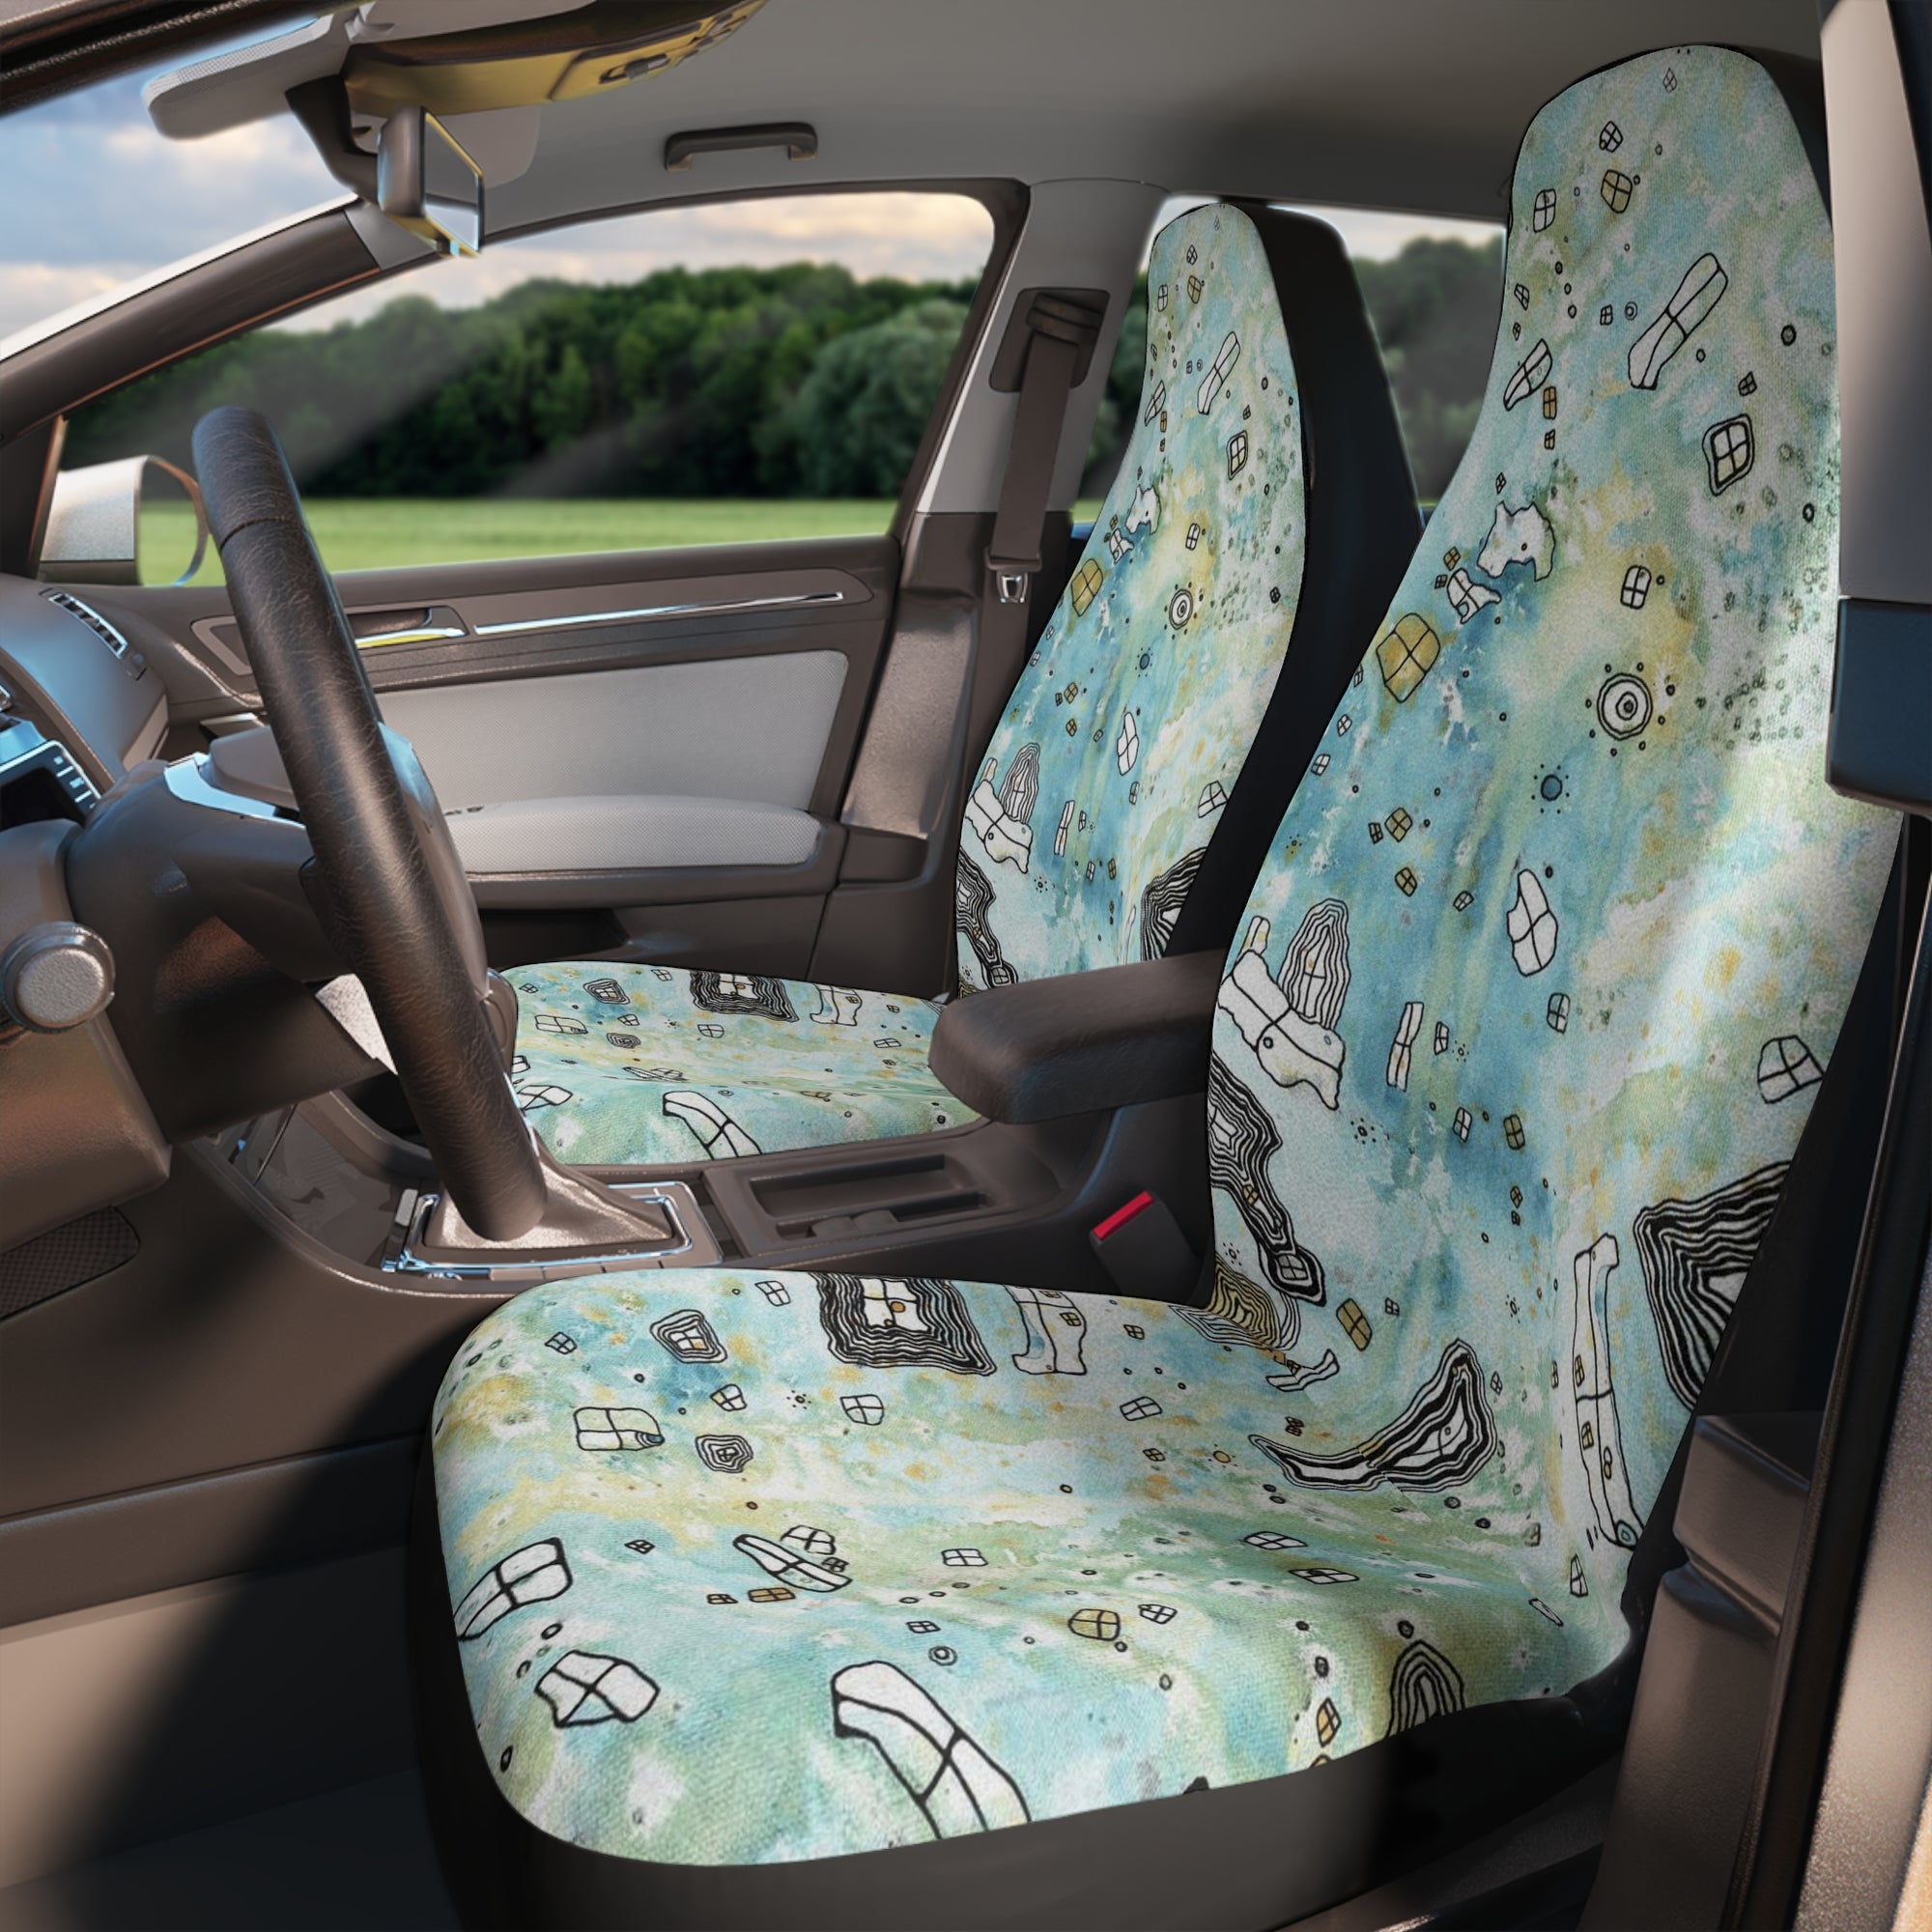 Original Whimsical Art on Car Seat Covers "Surreal Sky"